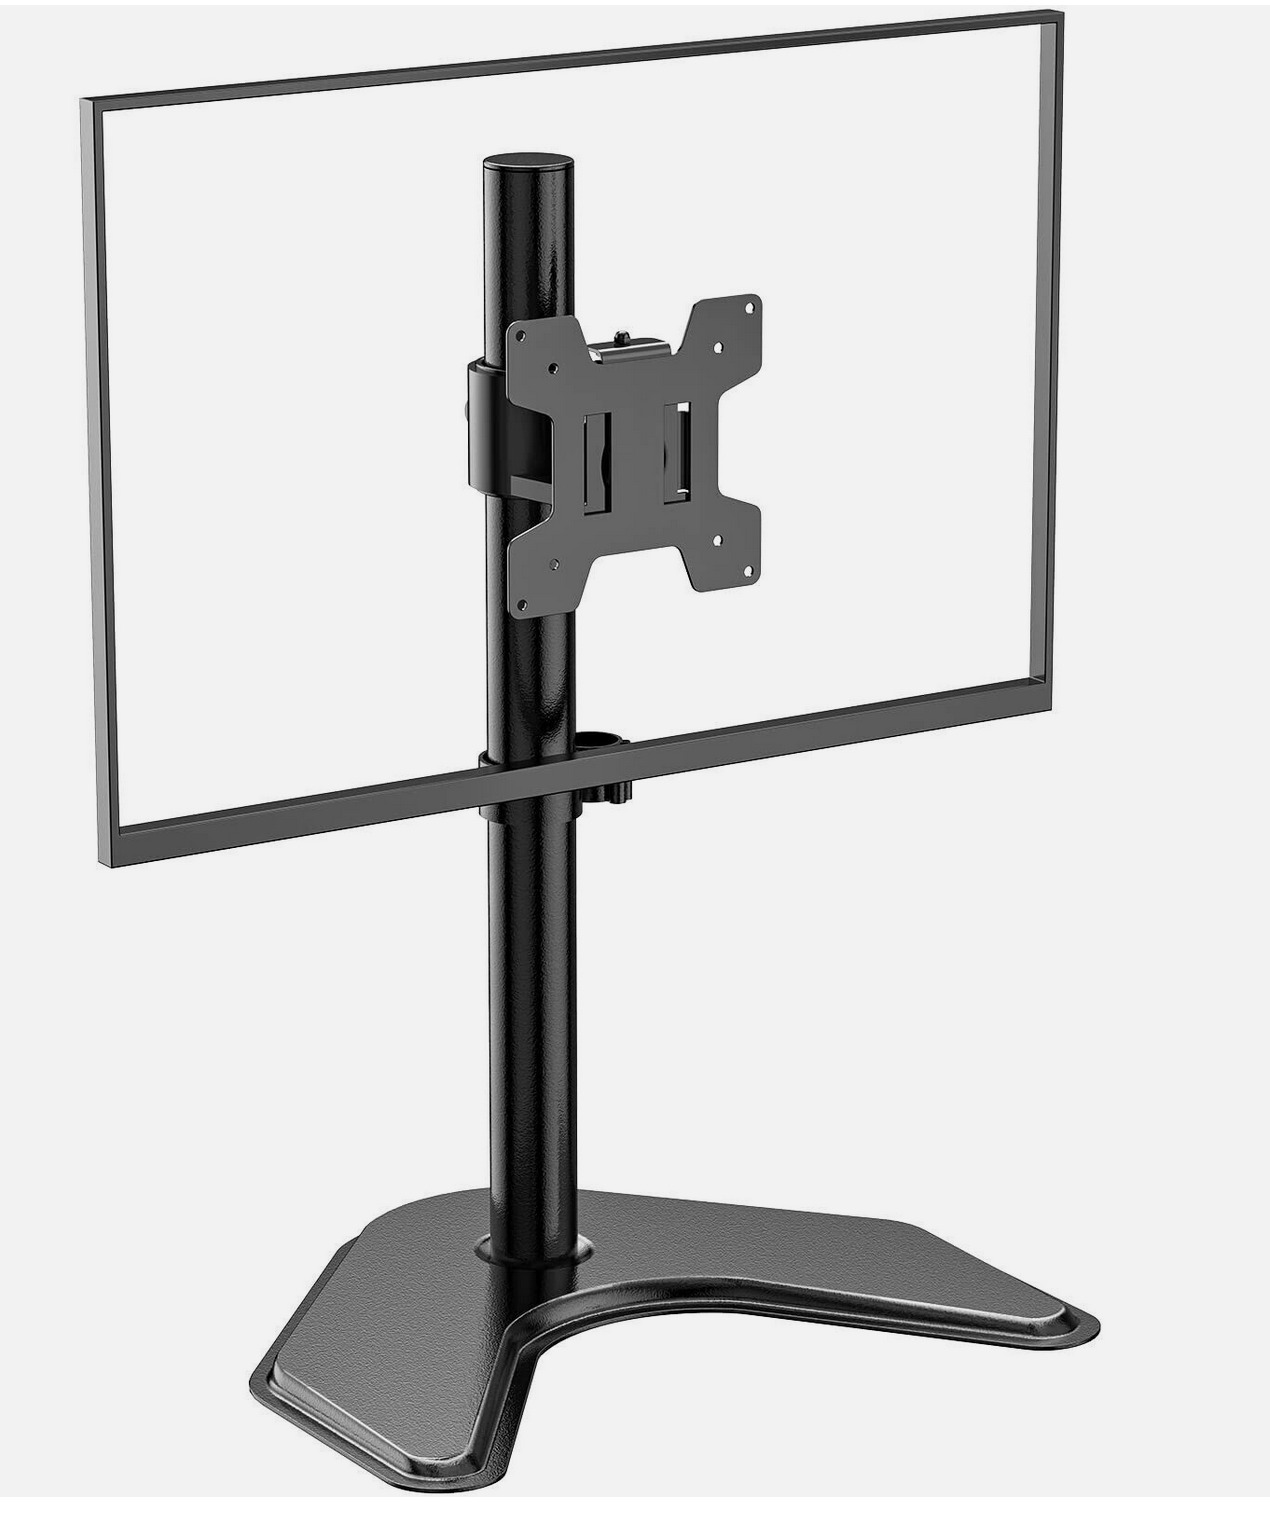 WALI Free Standing Single LCD Monitor Fully Adjustable Desk Mount Fits One up to